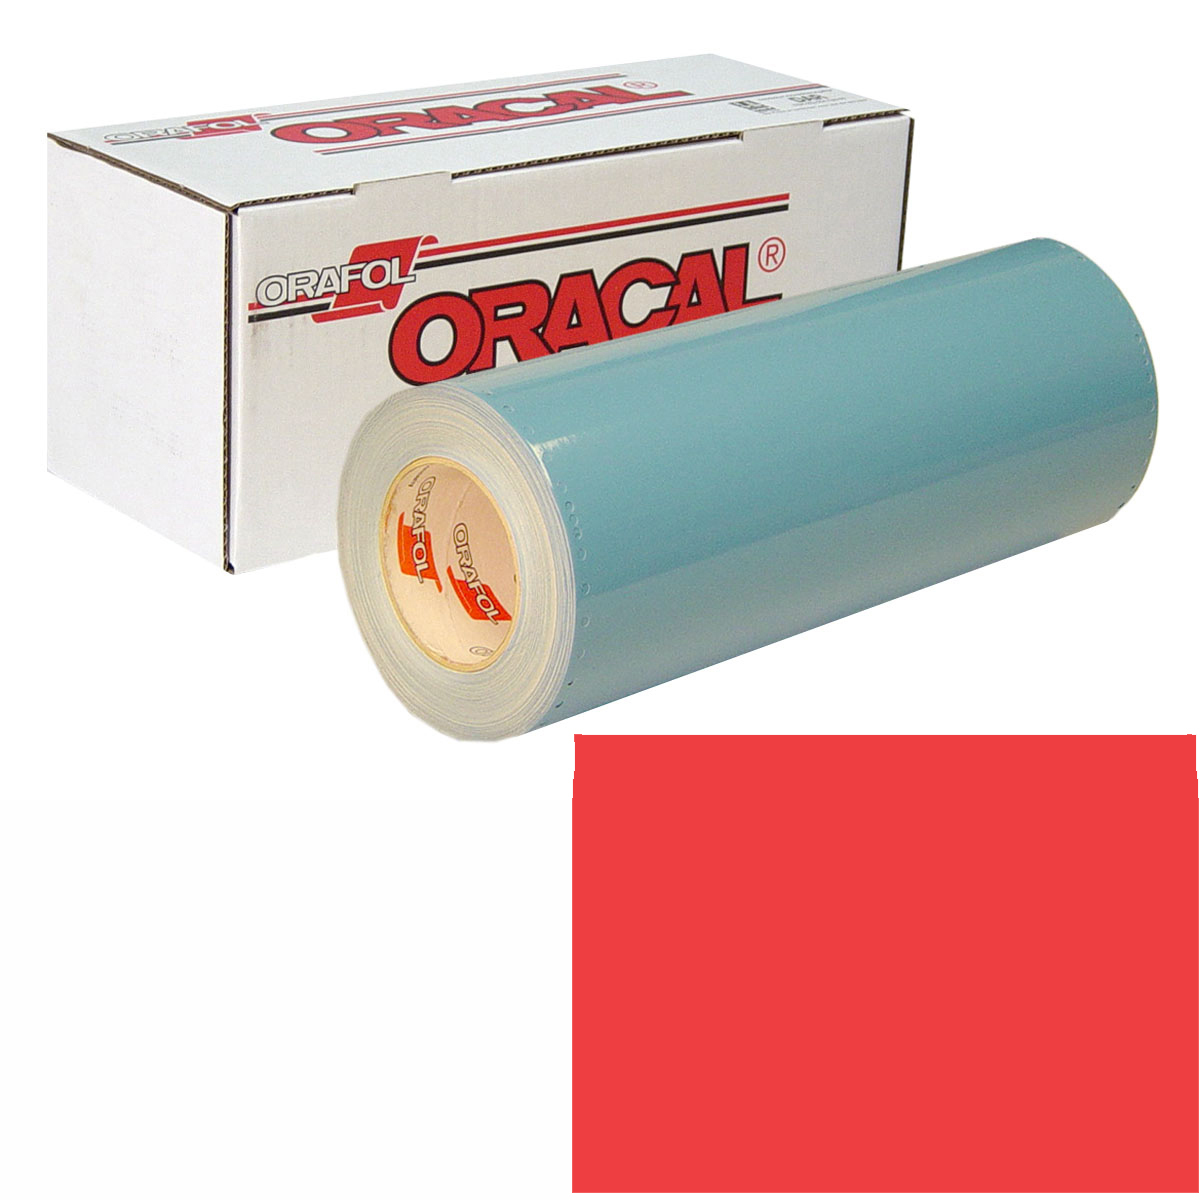 ORACAL 751 15in X 50yd 027 Tomato Red